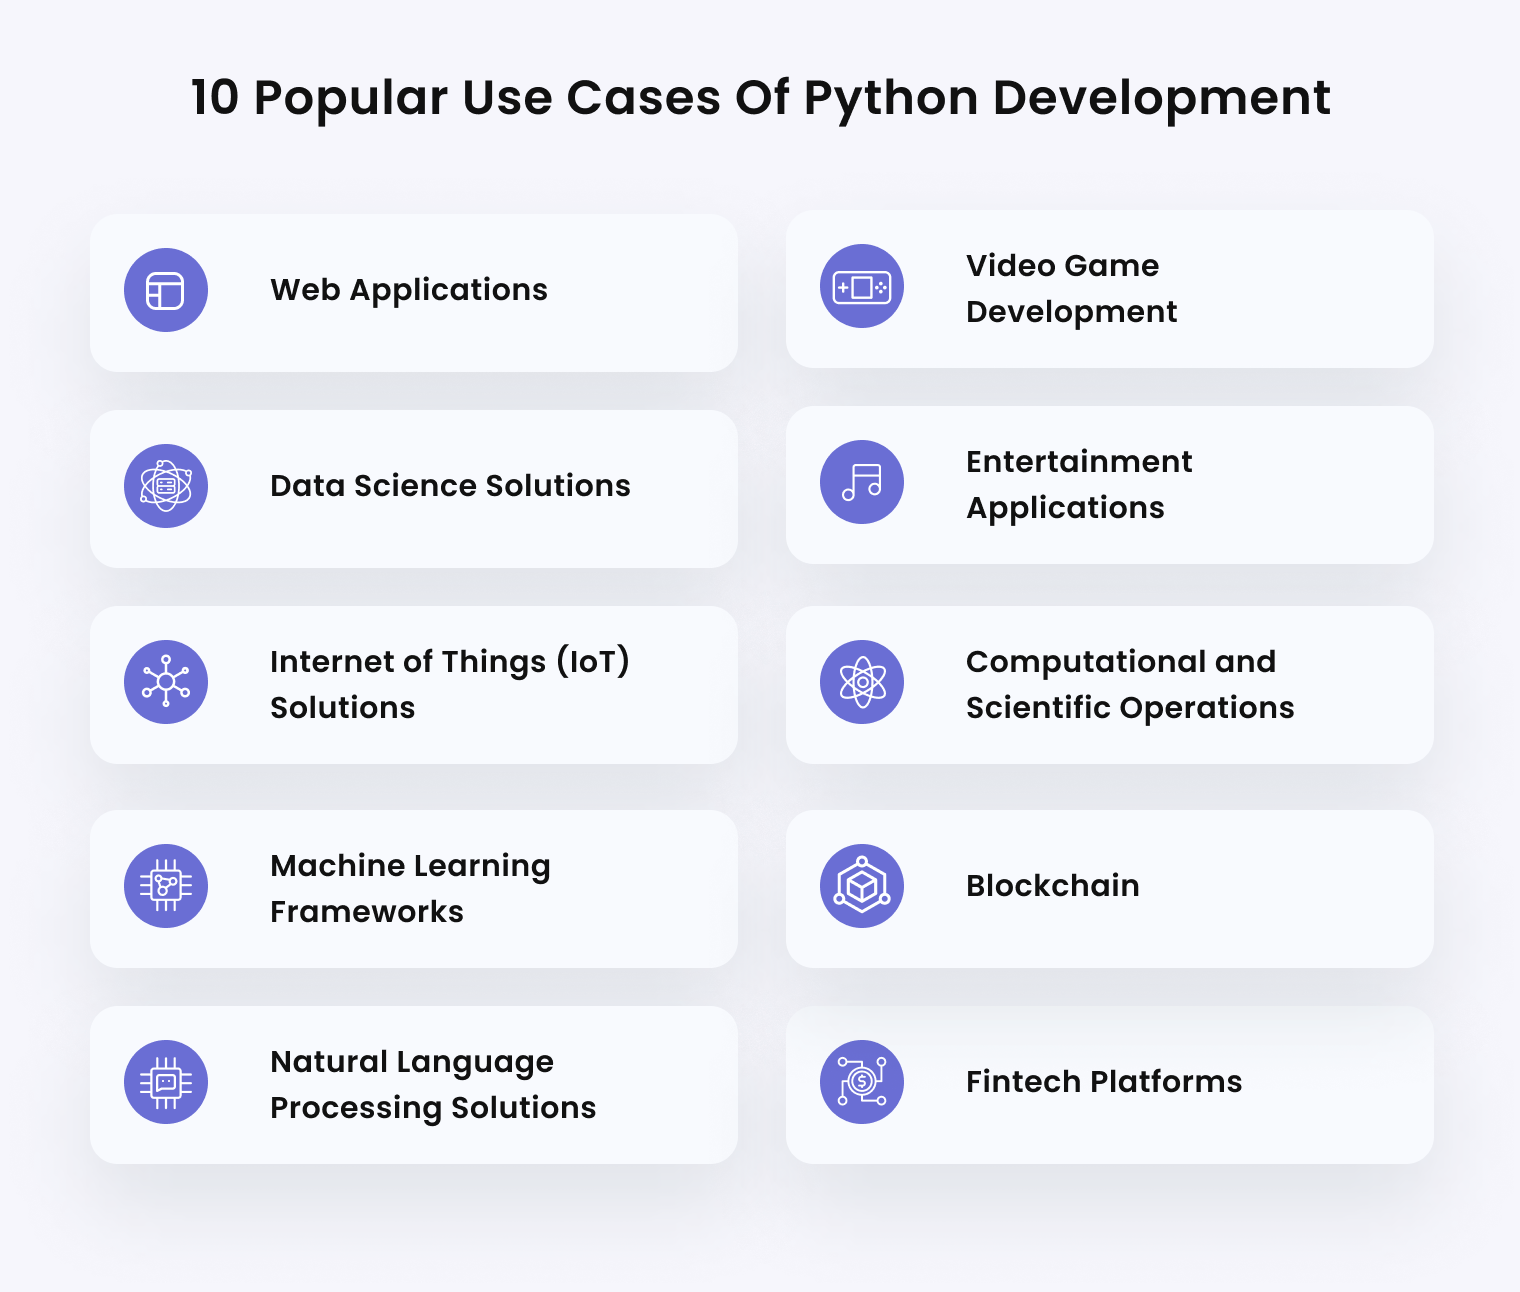 Python for Business – Use Cases and Main Benefits - 5